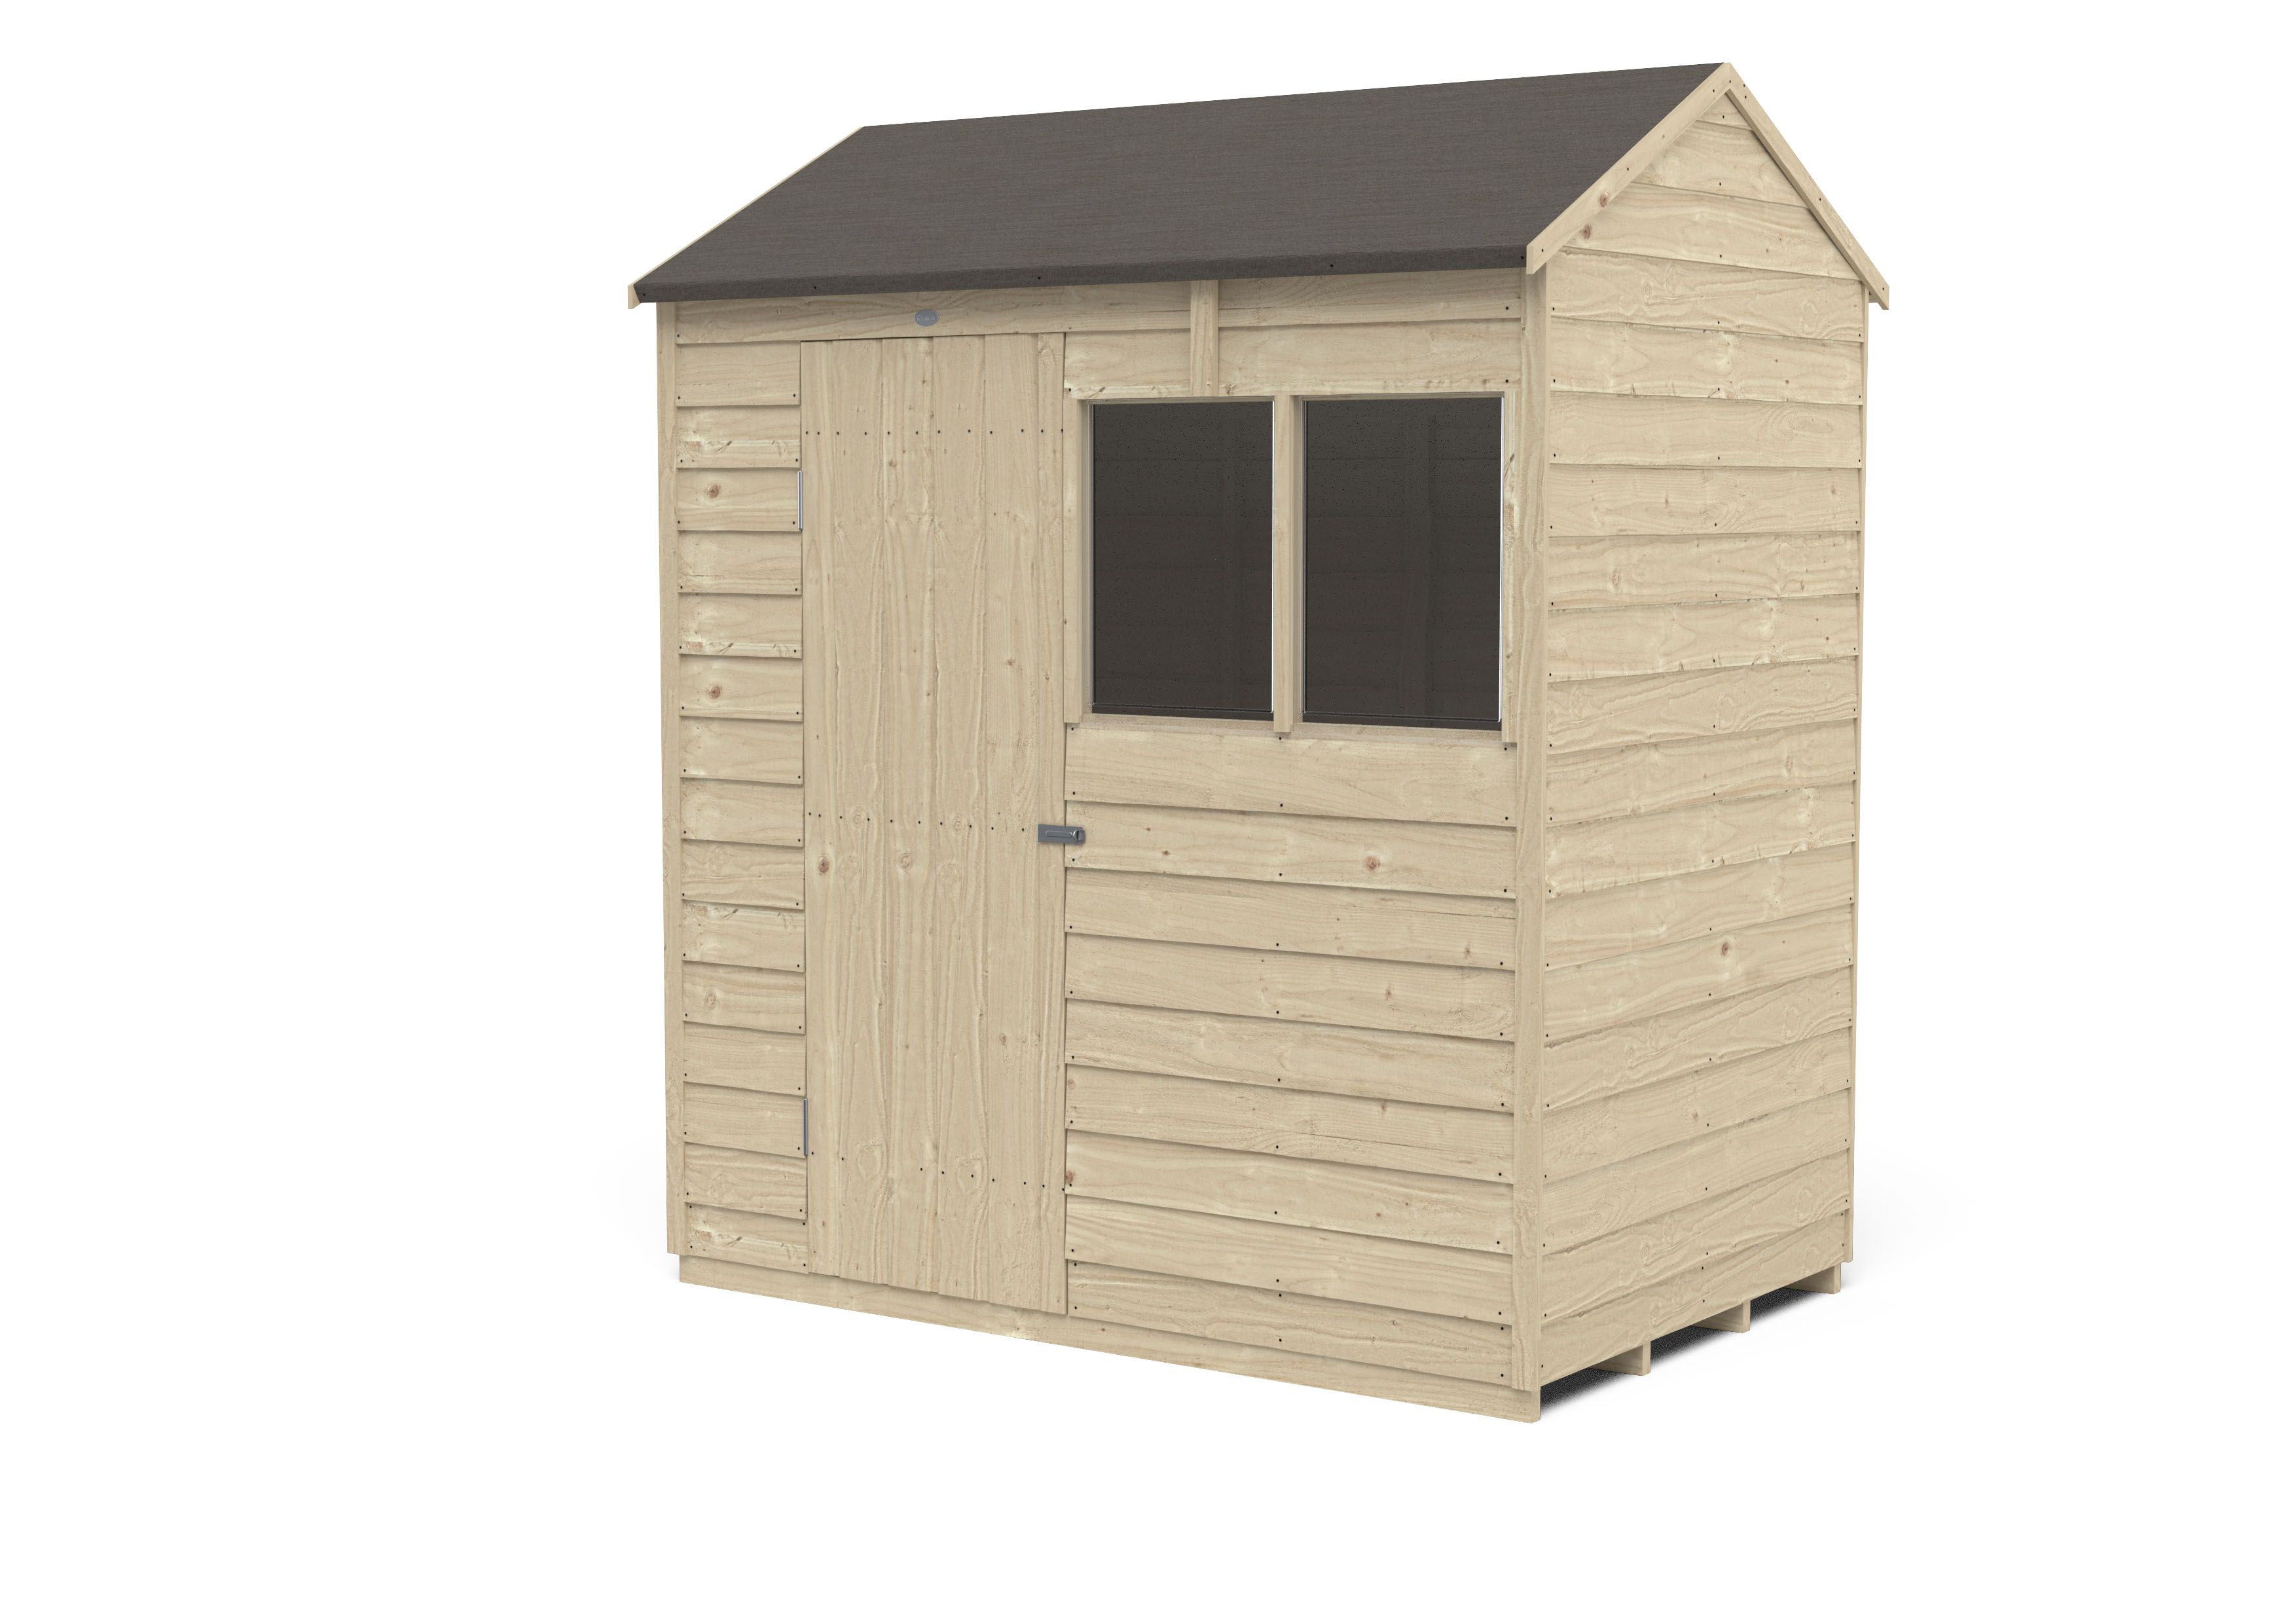 Forest Garden 6x4 ft Reverse apex Wooden Shed with floor & 2 windows (Base included)